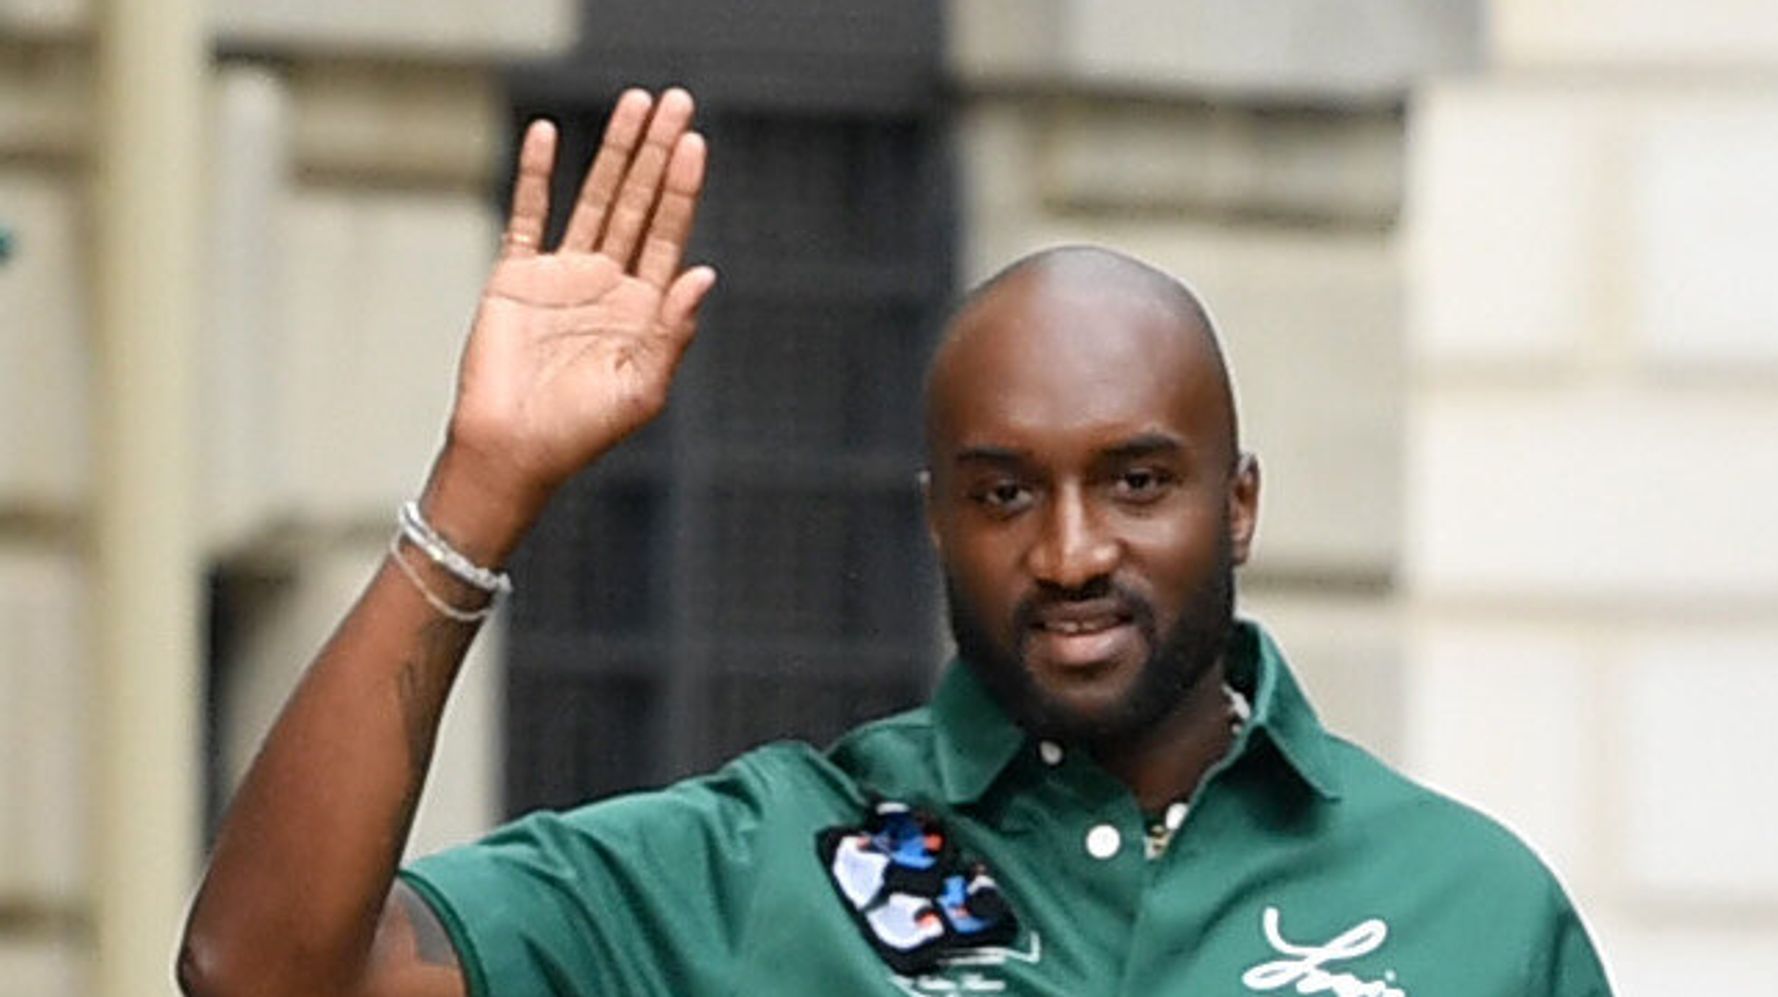 Louis Vuitton pays tribute to Virgil Abloh with Paris Fashion Week show  held at the Louvre